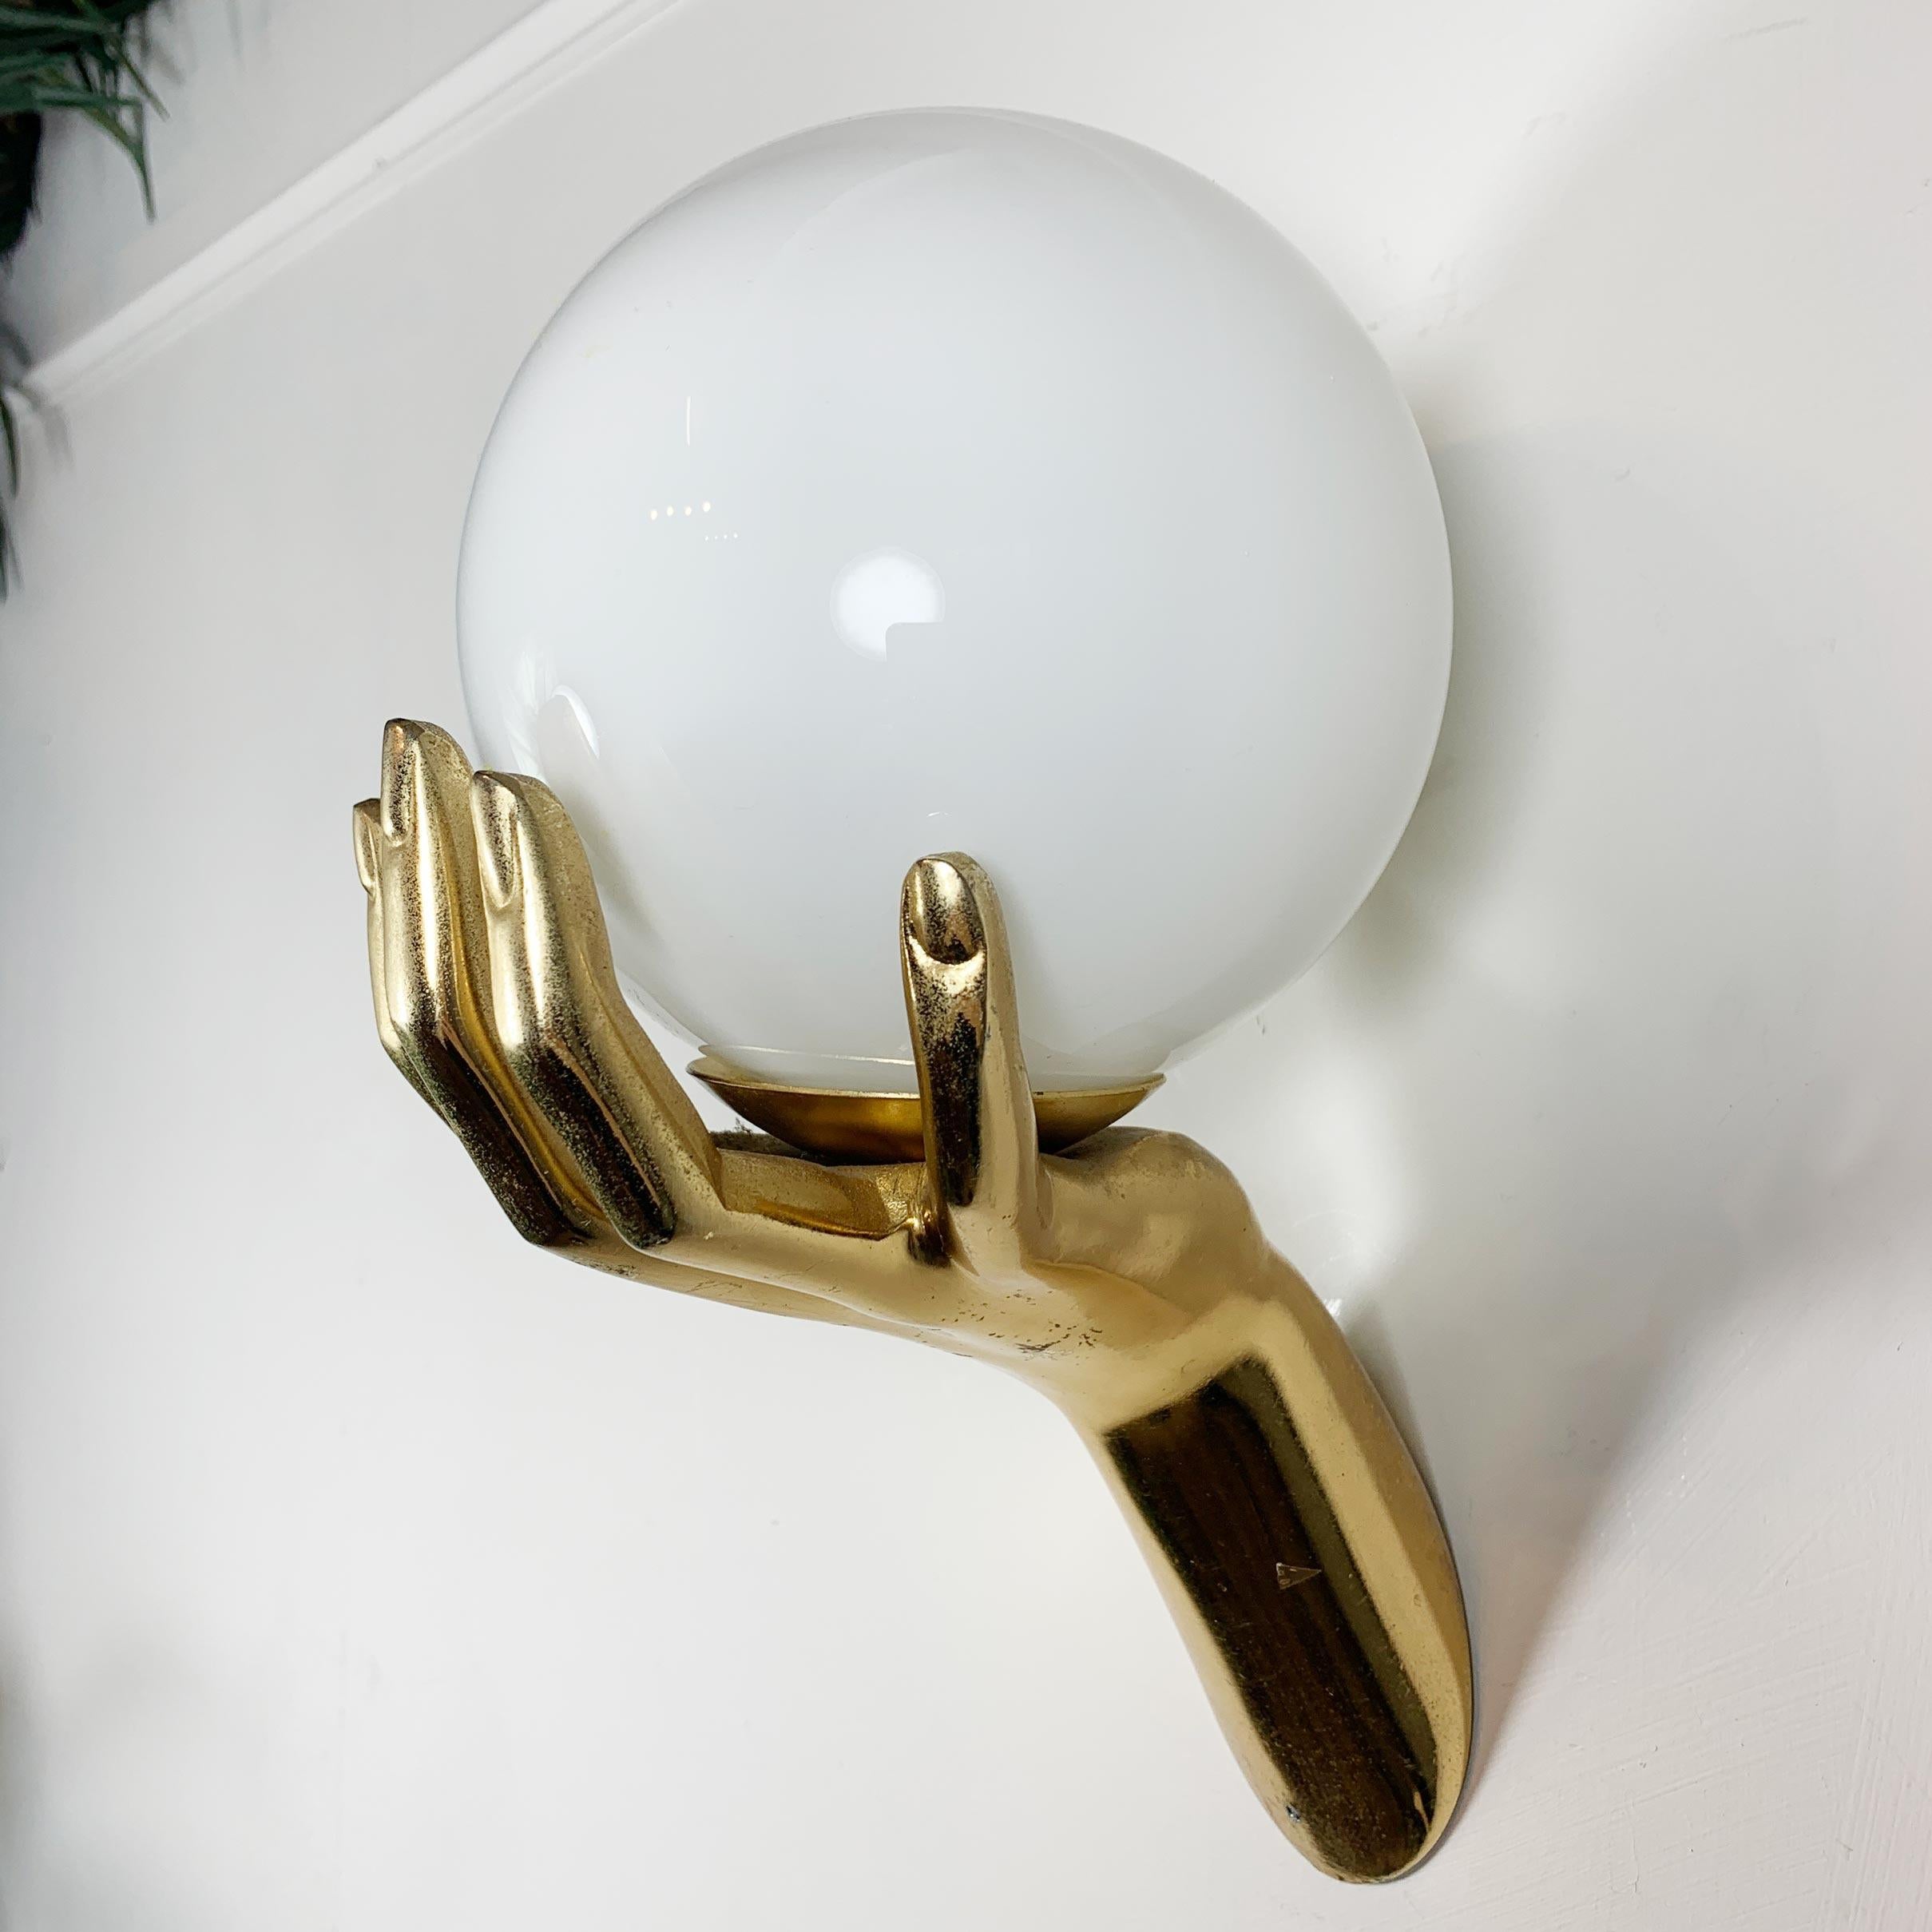 Maison Arlus Gold Bronze Hand Wall Sconce, France, 1970s For Sale 2